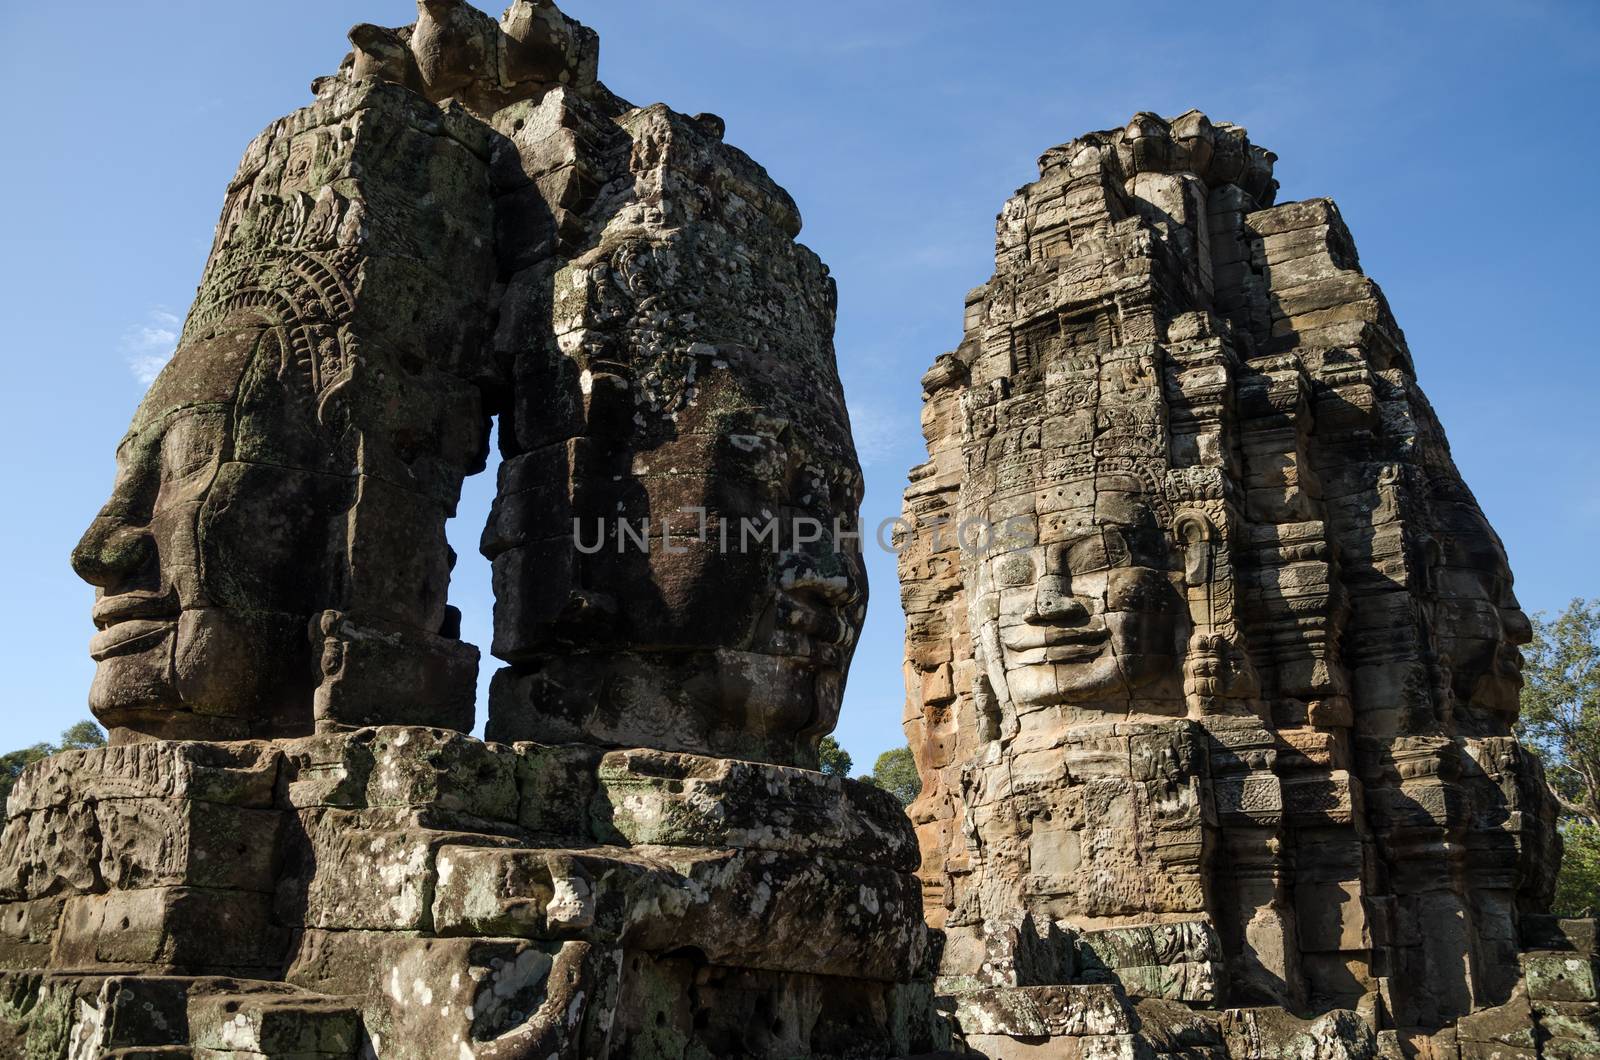 Giant stone faces of Bayon temple in Angkor Thom by siraanamwong